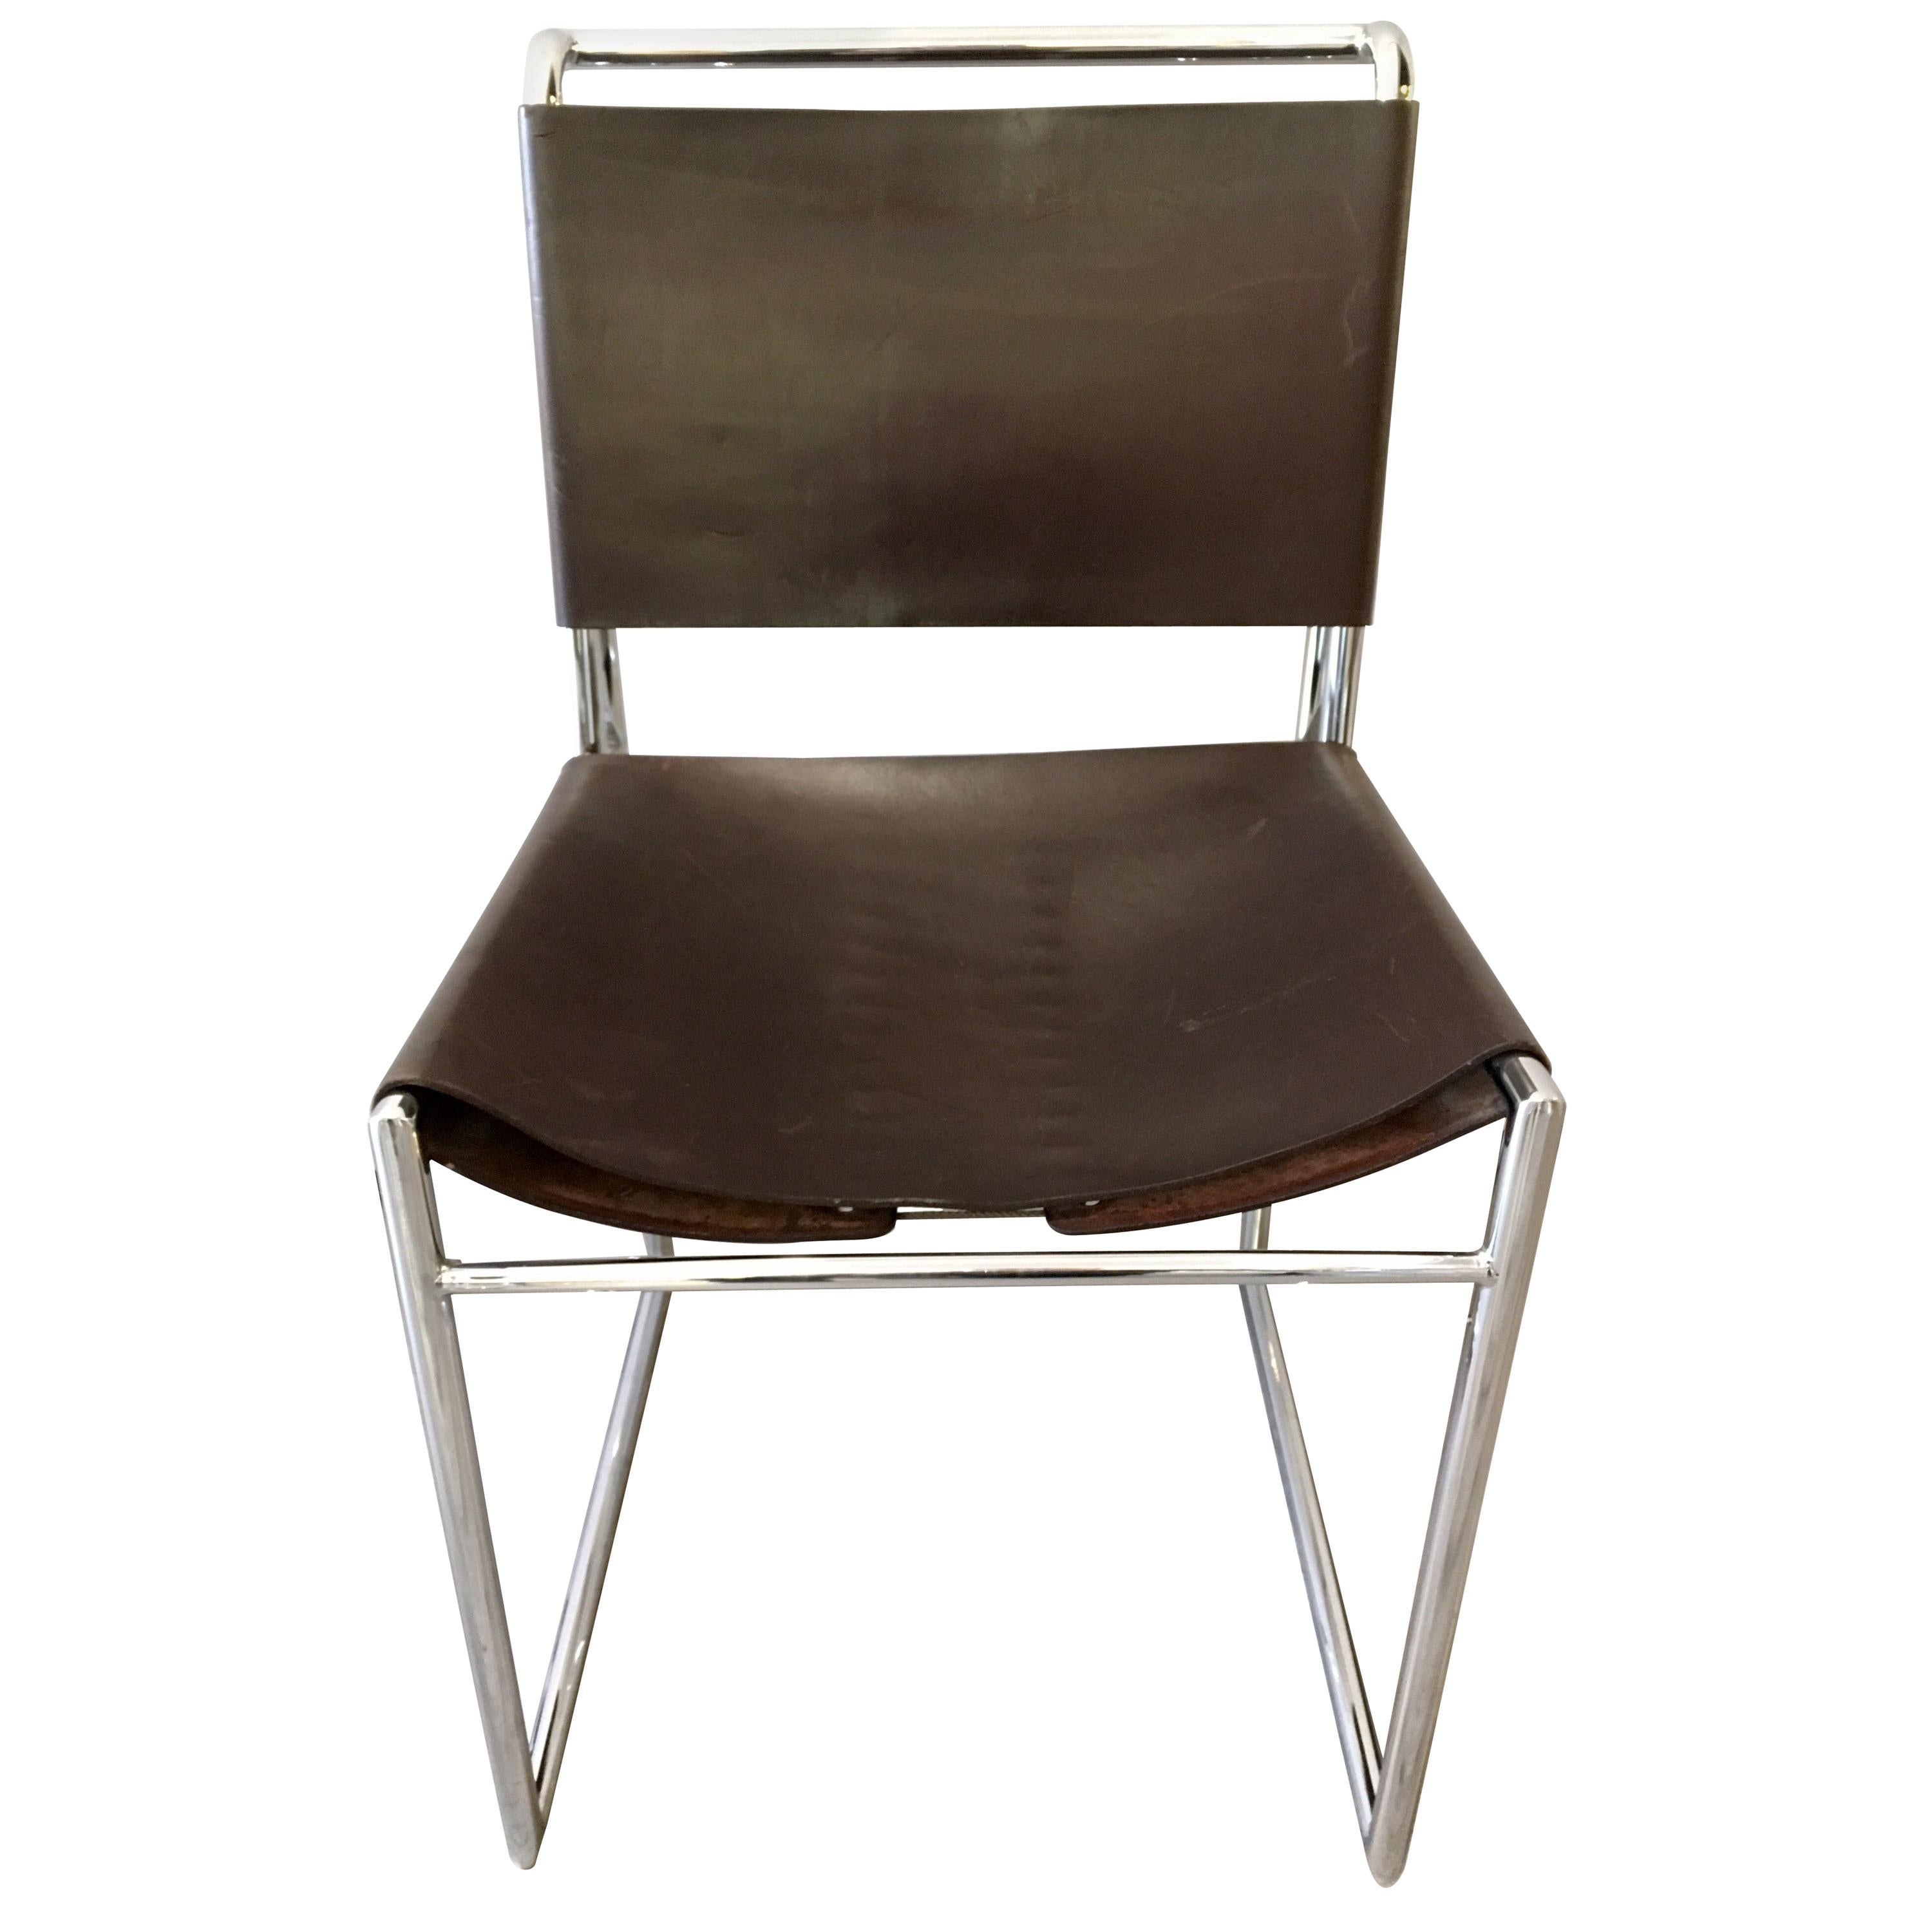 Set of one hundred matching Marcel Breuer B40 dining chairs. These chairs feature heavy chrome, dark brown leather and the coveted leather corset system at backrest and seat bottom. We have several of these chairs which come out of one of the